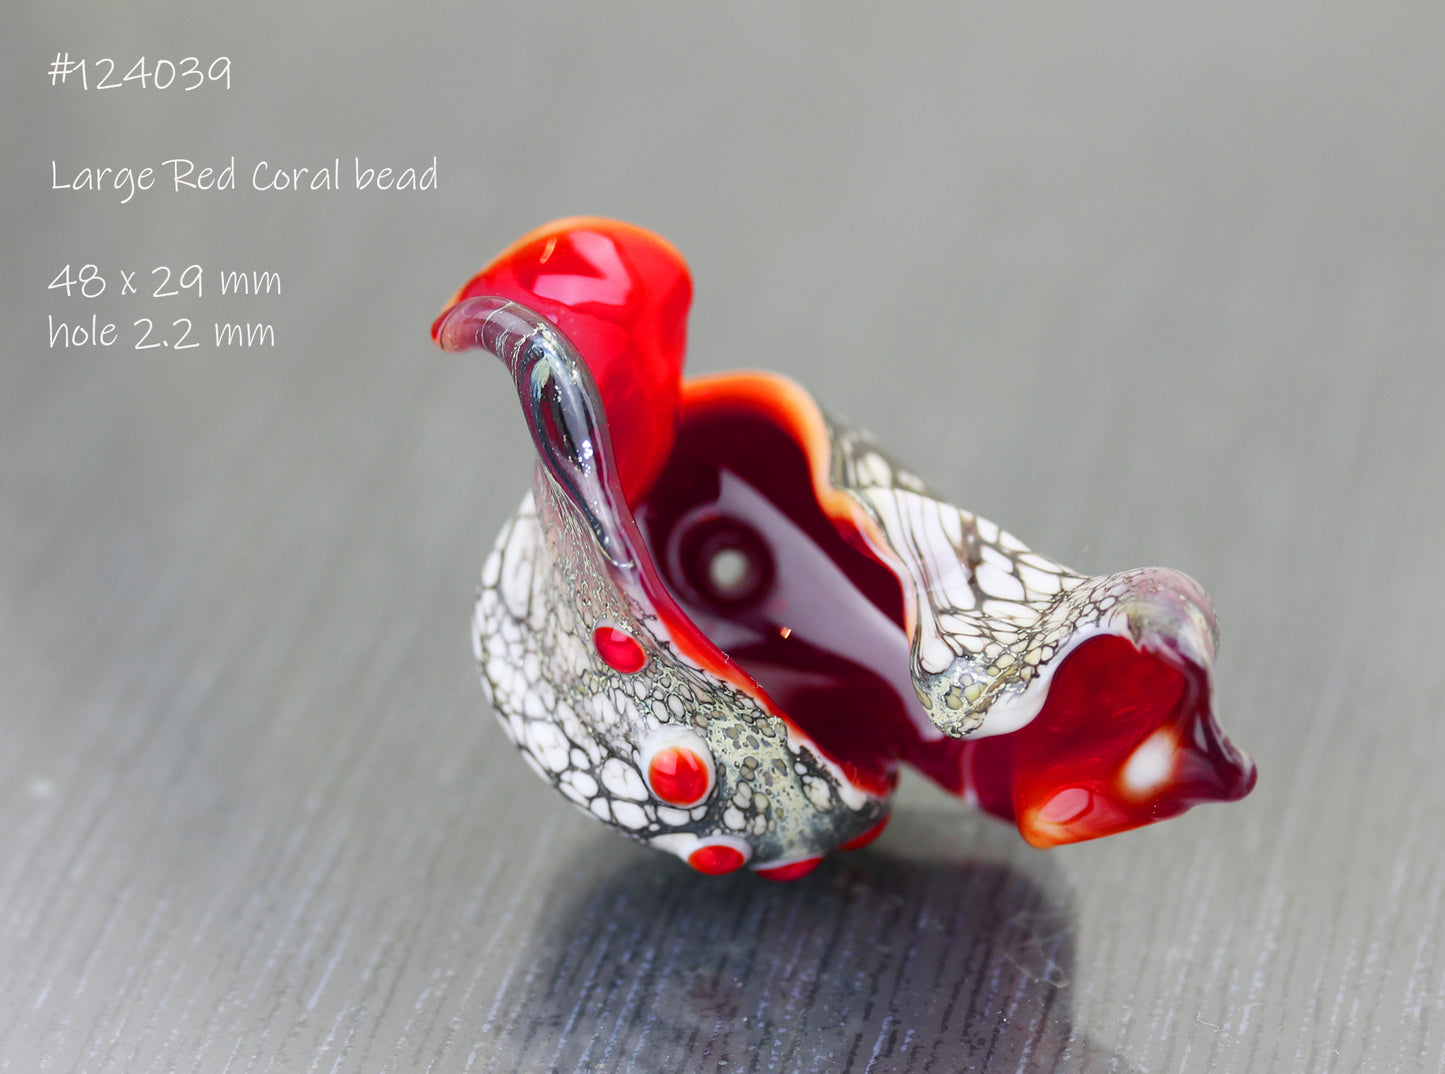 Sculptural red Coral bead #124036